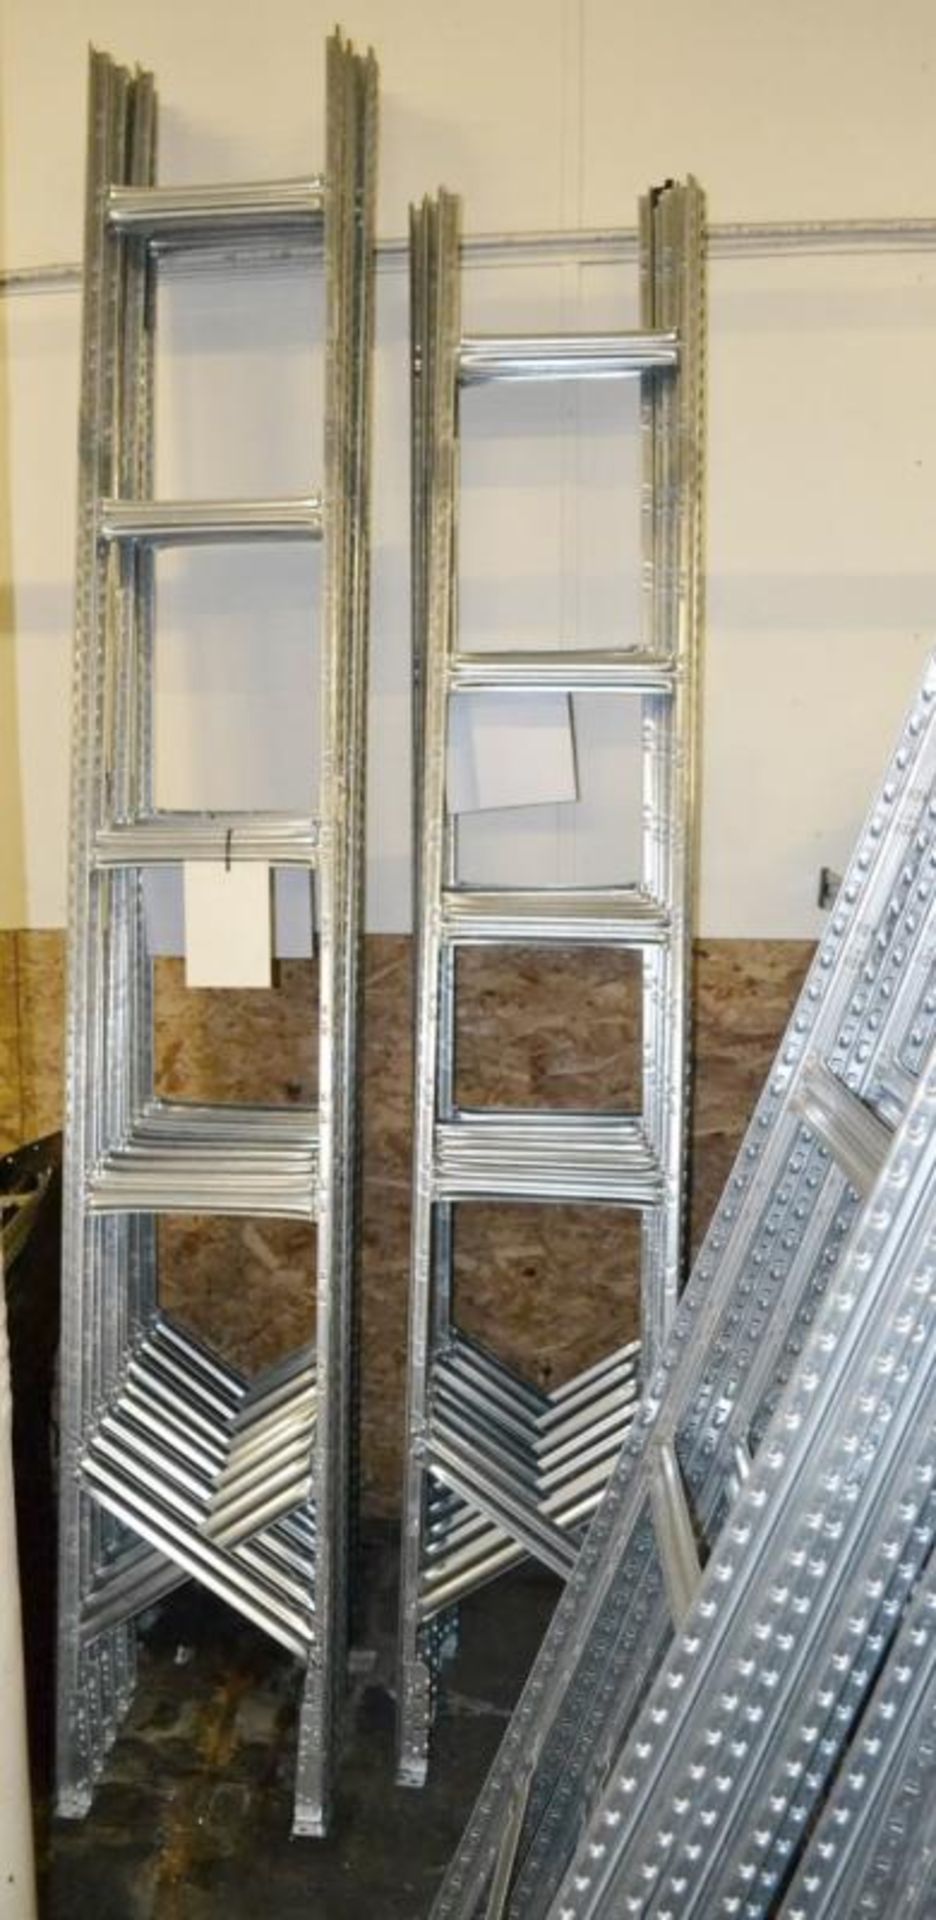 13 x Bays of Metalsistem Steel Modular Storage Shelving - Includes 28 Pieces - Recently Removed - Image 9 of 18